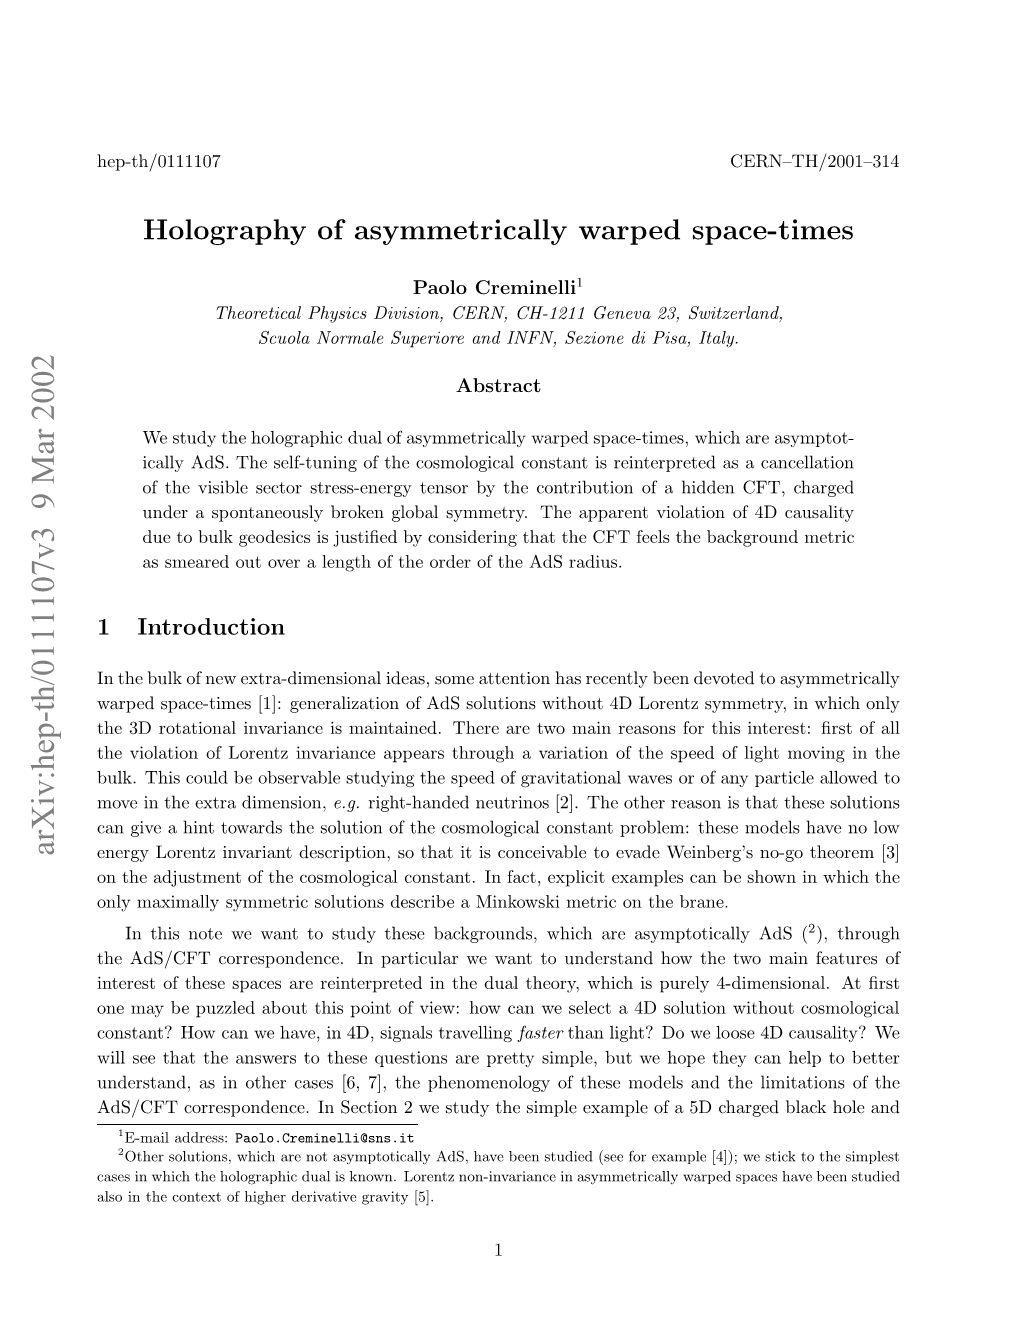 Holography of Asymmetrically Warped Space-Times